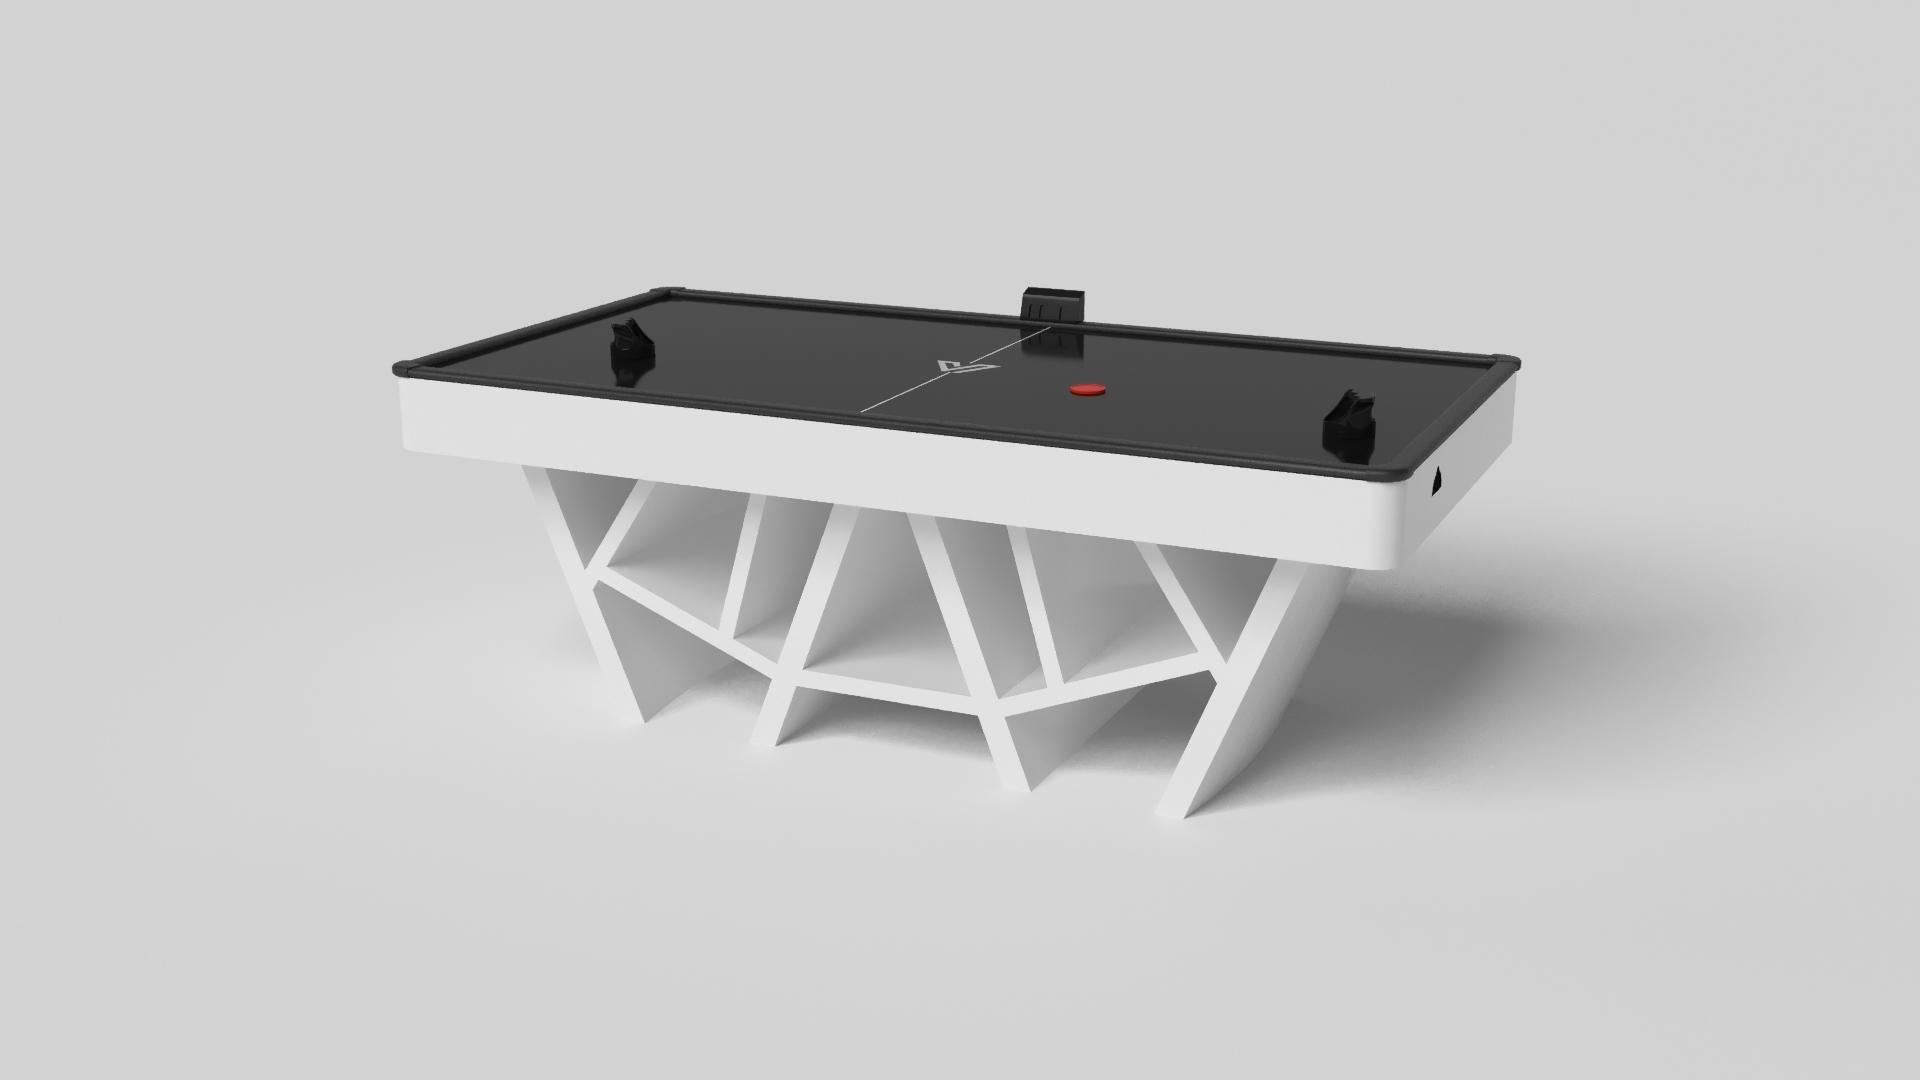 With a combination of acute angles, smooth lines, and geometric configurations, the Maze air hockey table in walnut is characterized by a labyrinth-inspired base with a mystifying motif. Beautifully detailed with a smooth black top for game play,